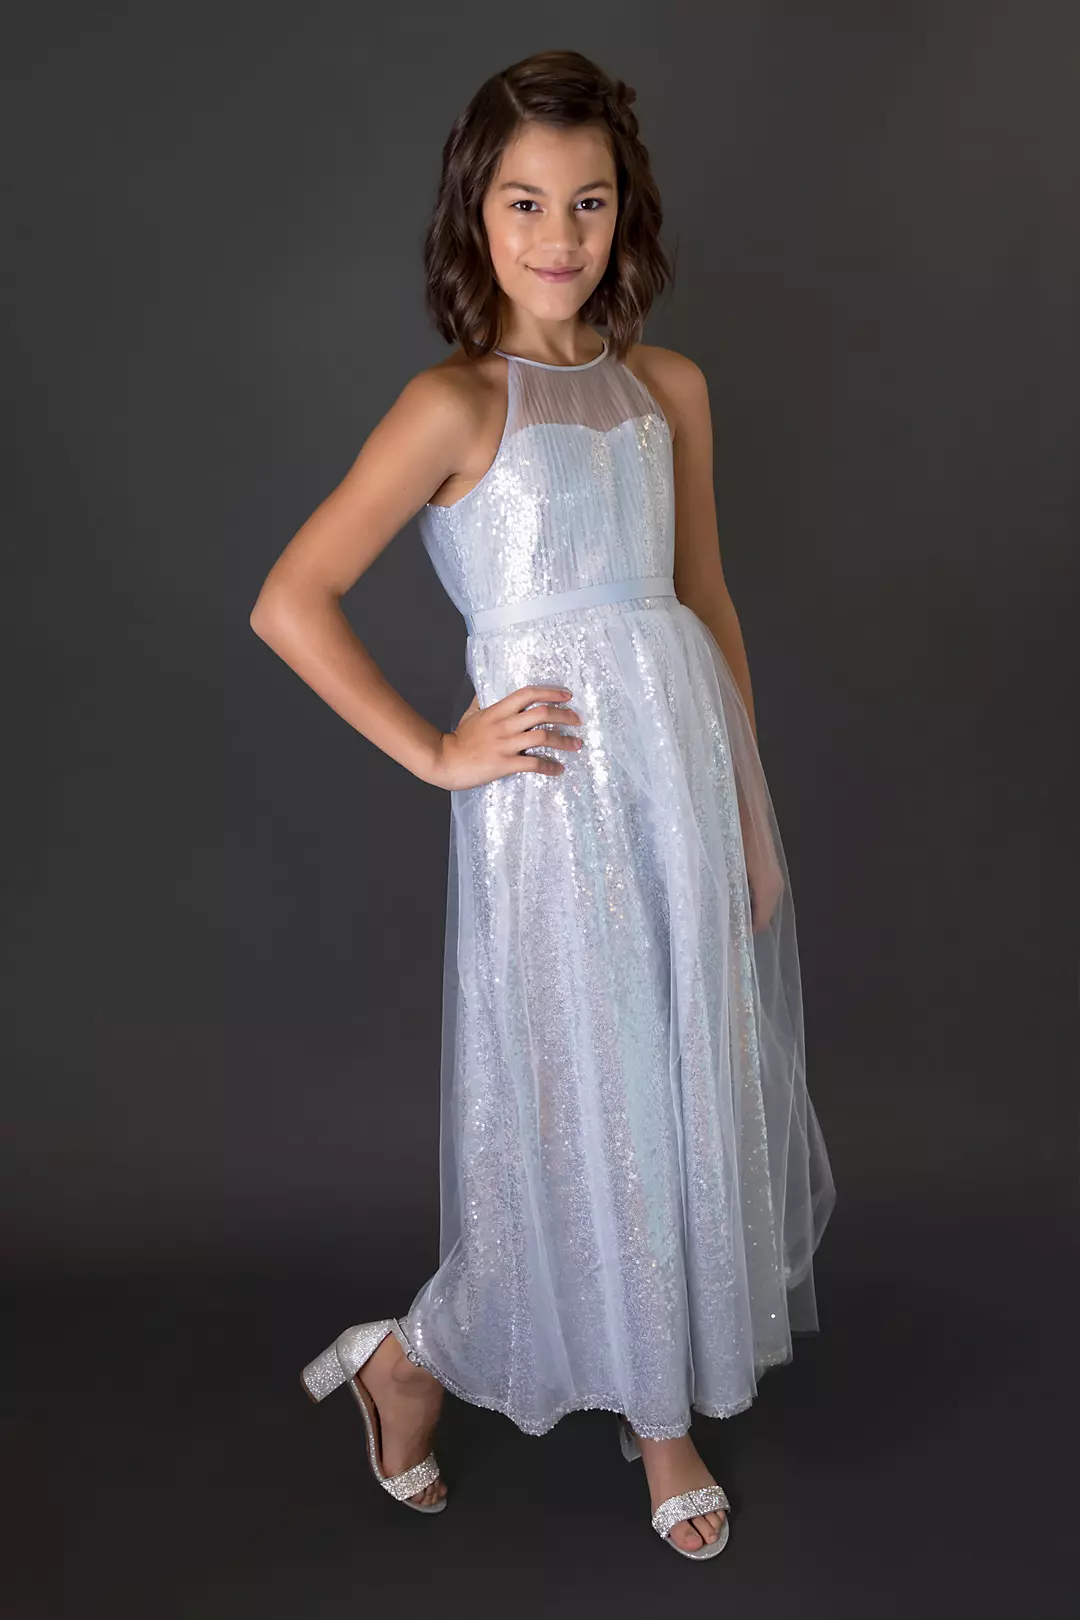 Sequin Tulle Overlay Girls Dress with Satin Sash Image